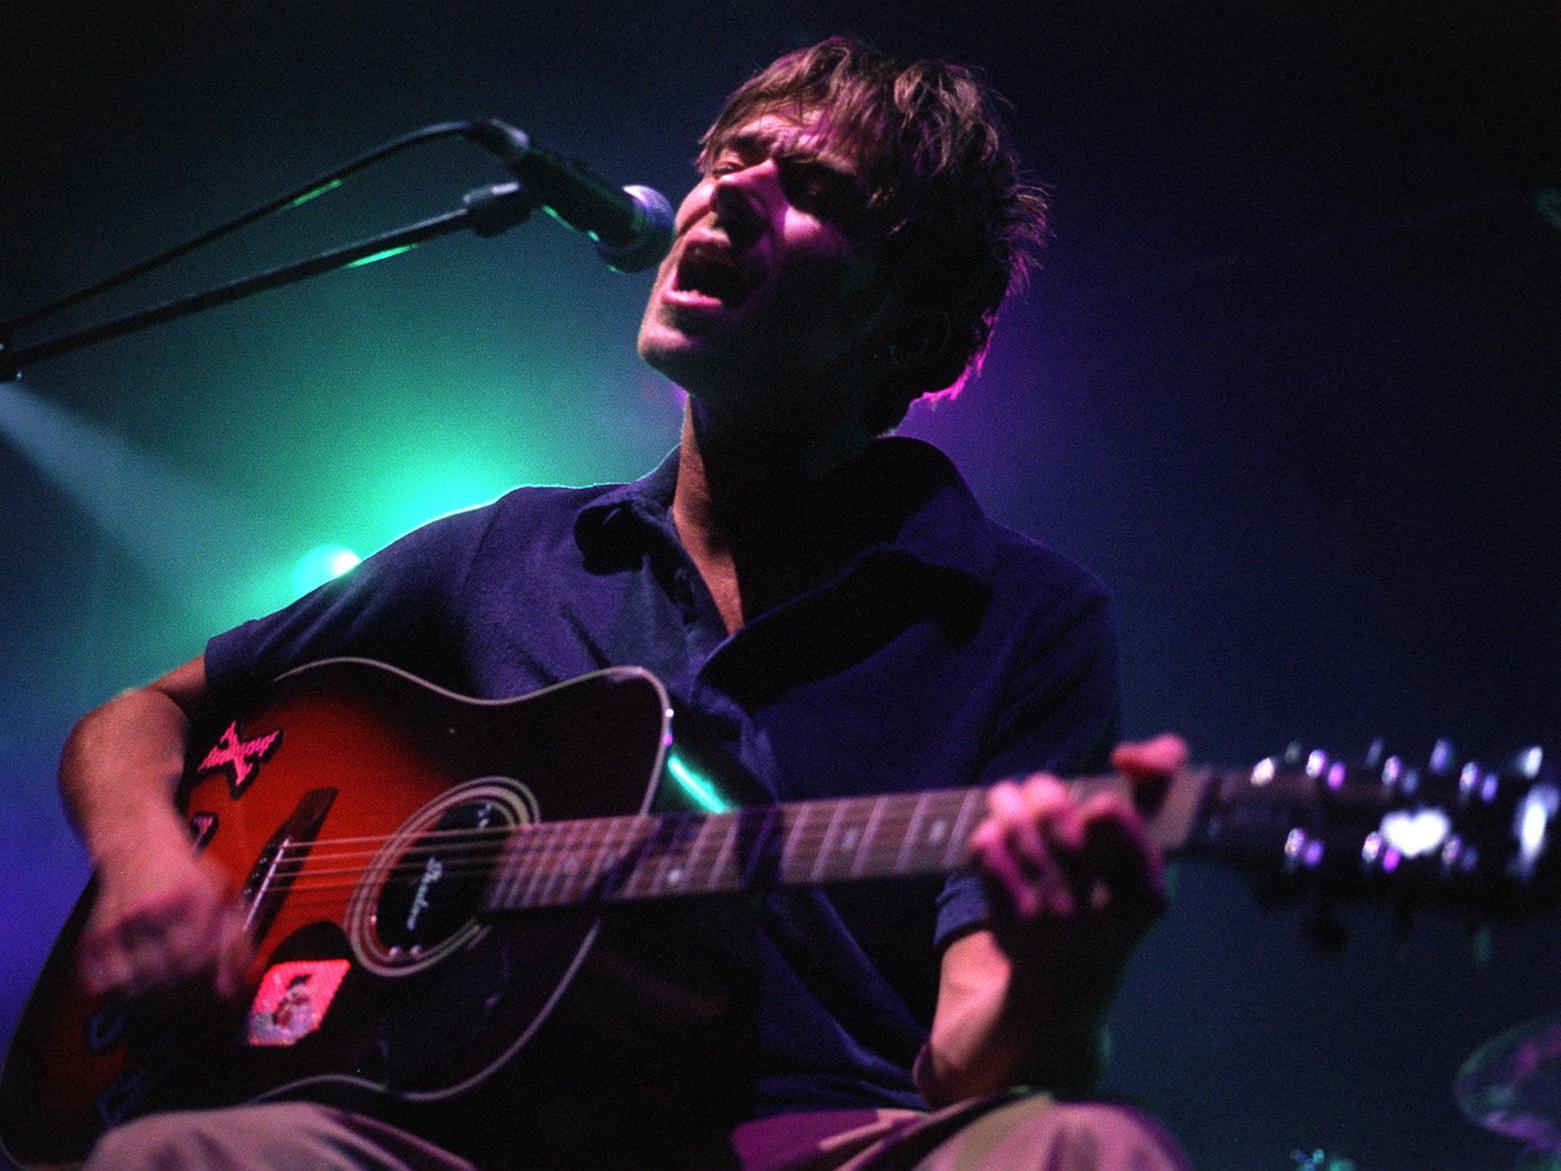 Blur frontman Damon Albarn played a solo gig at The Town and Country Club in Leeds.